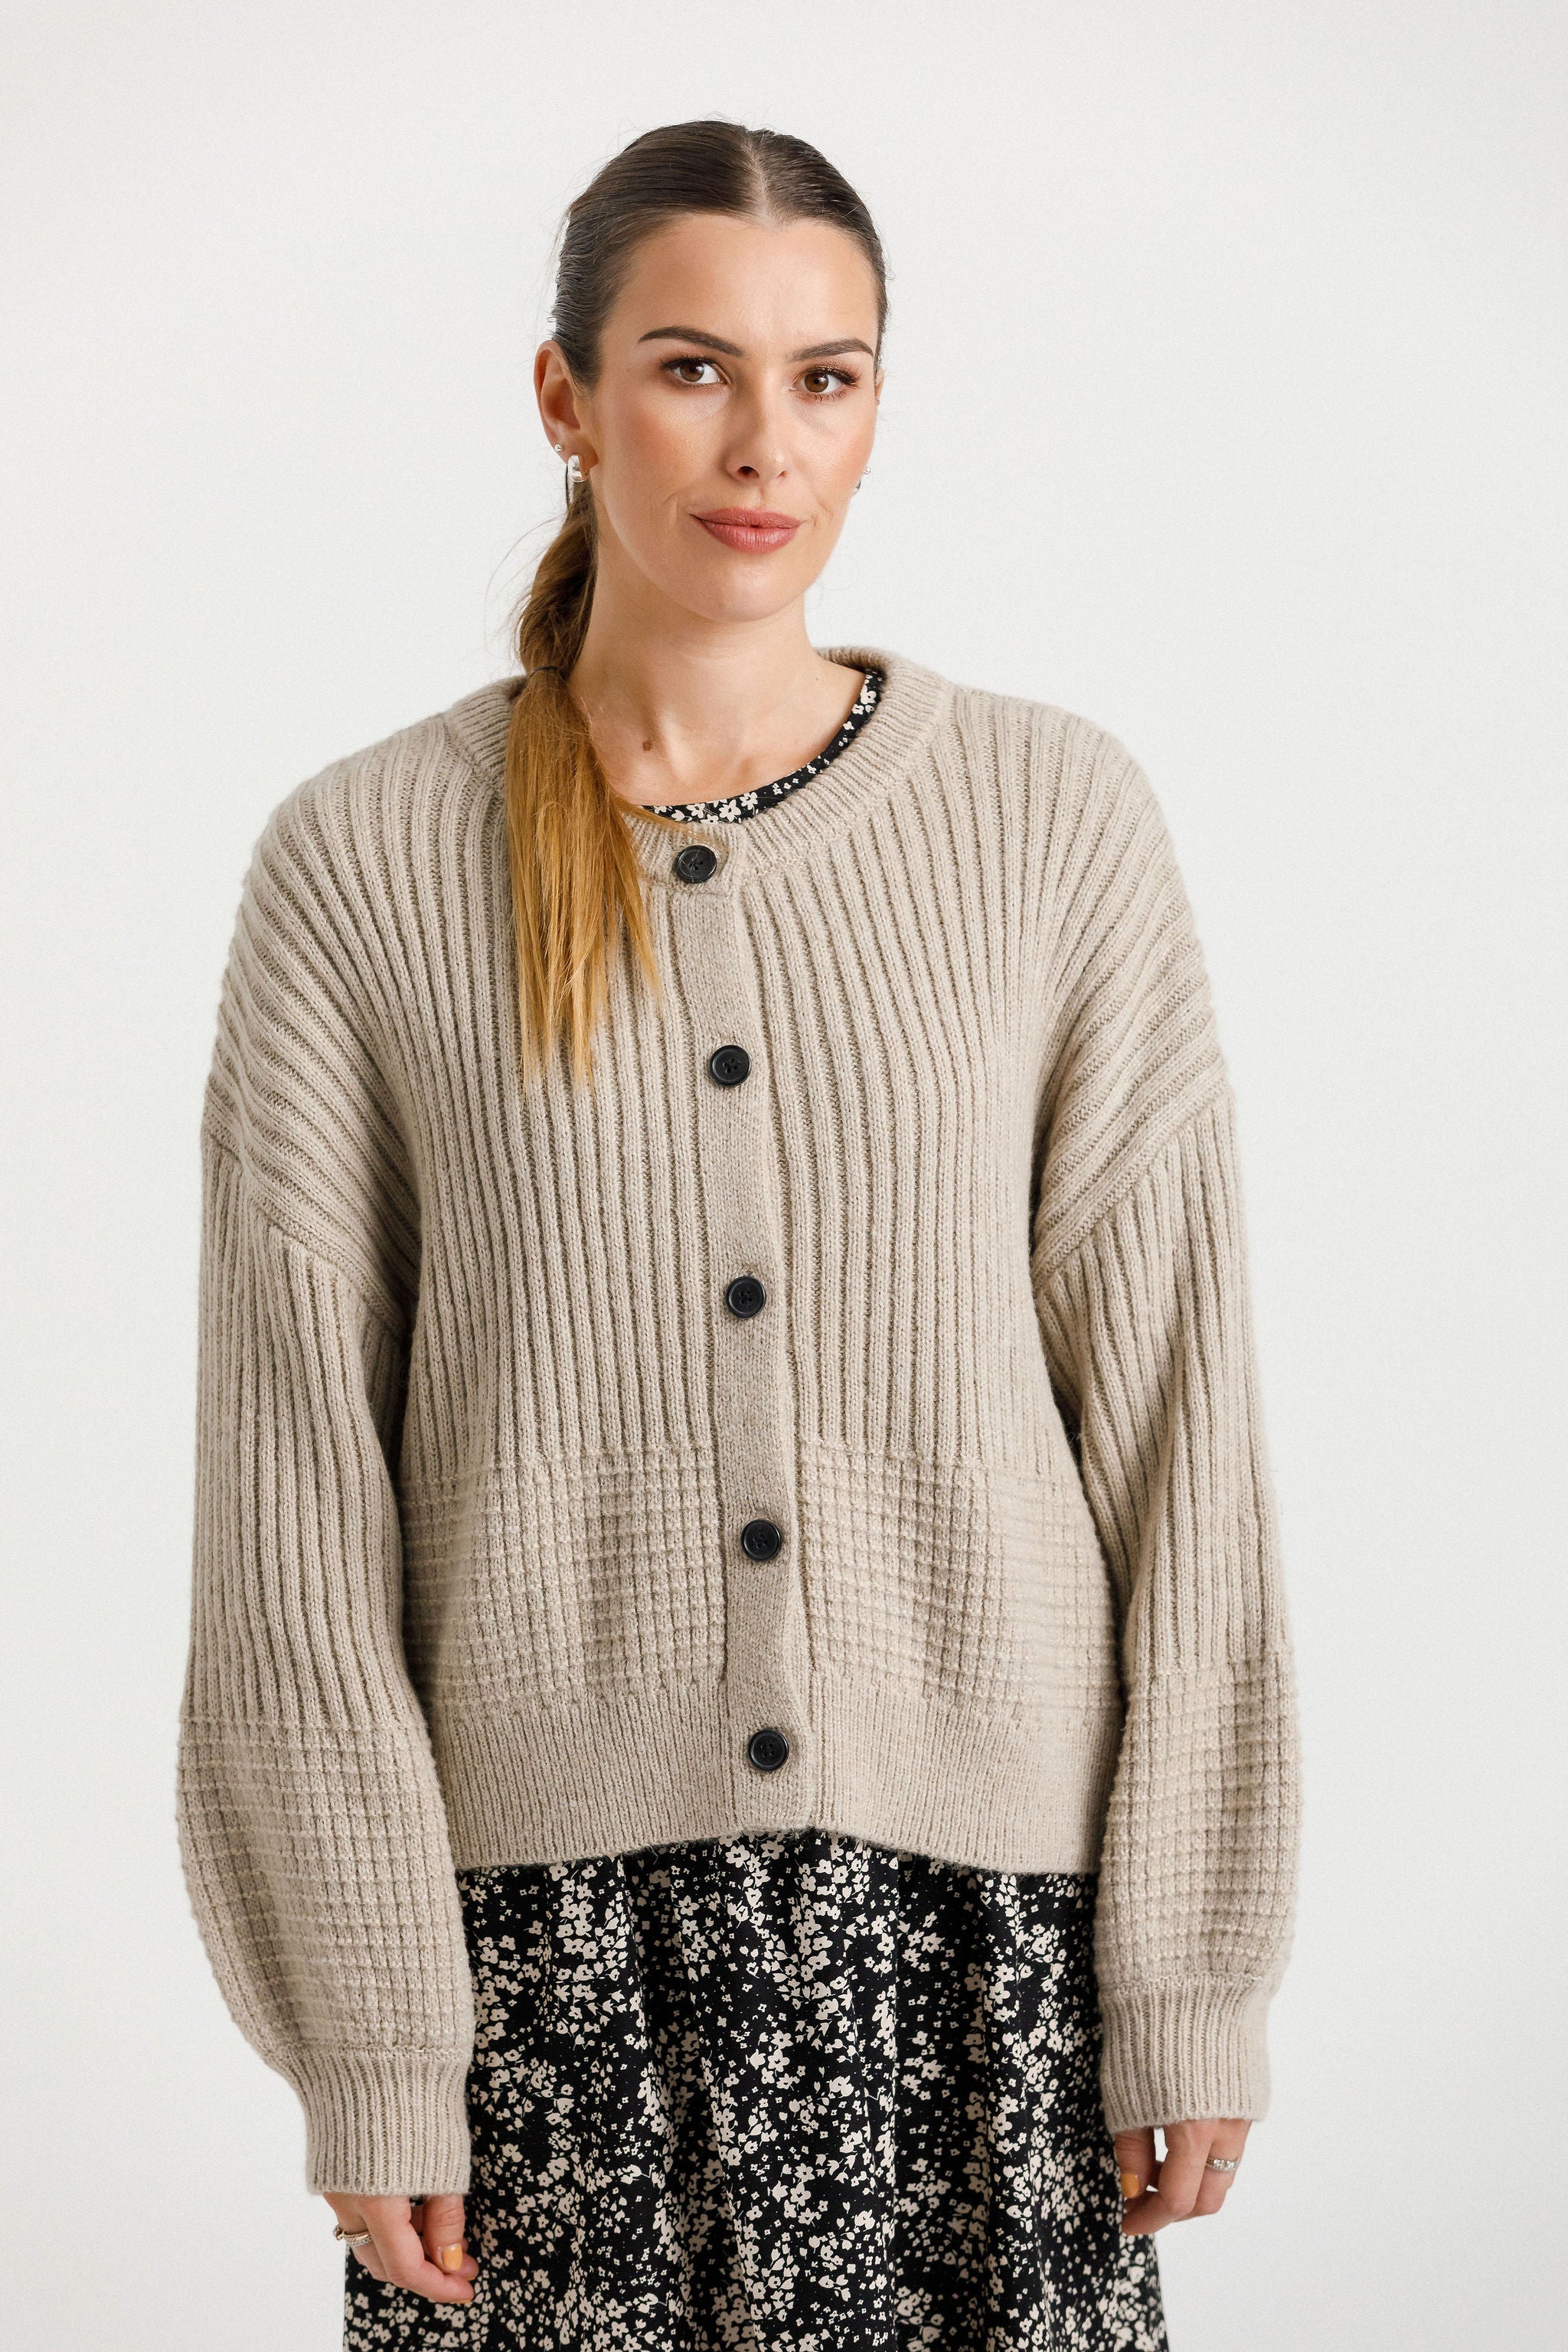 Coming Soon - Sizzle Cleo Cardigan - Oatmeal